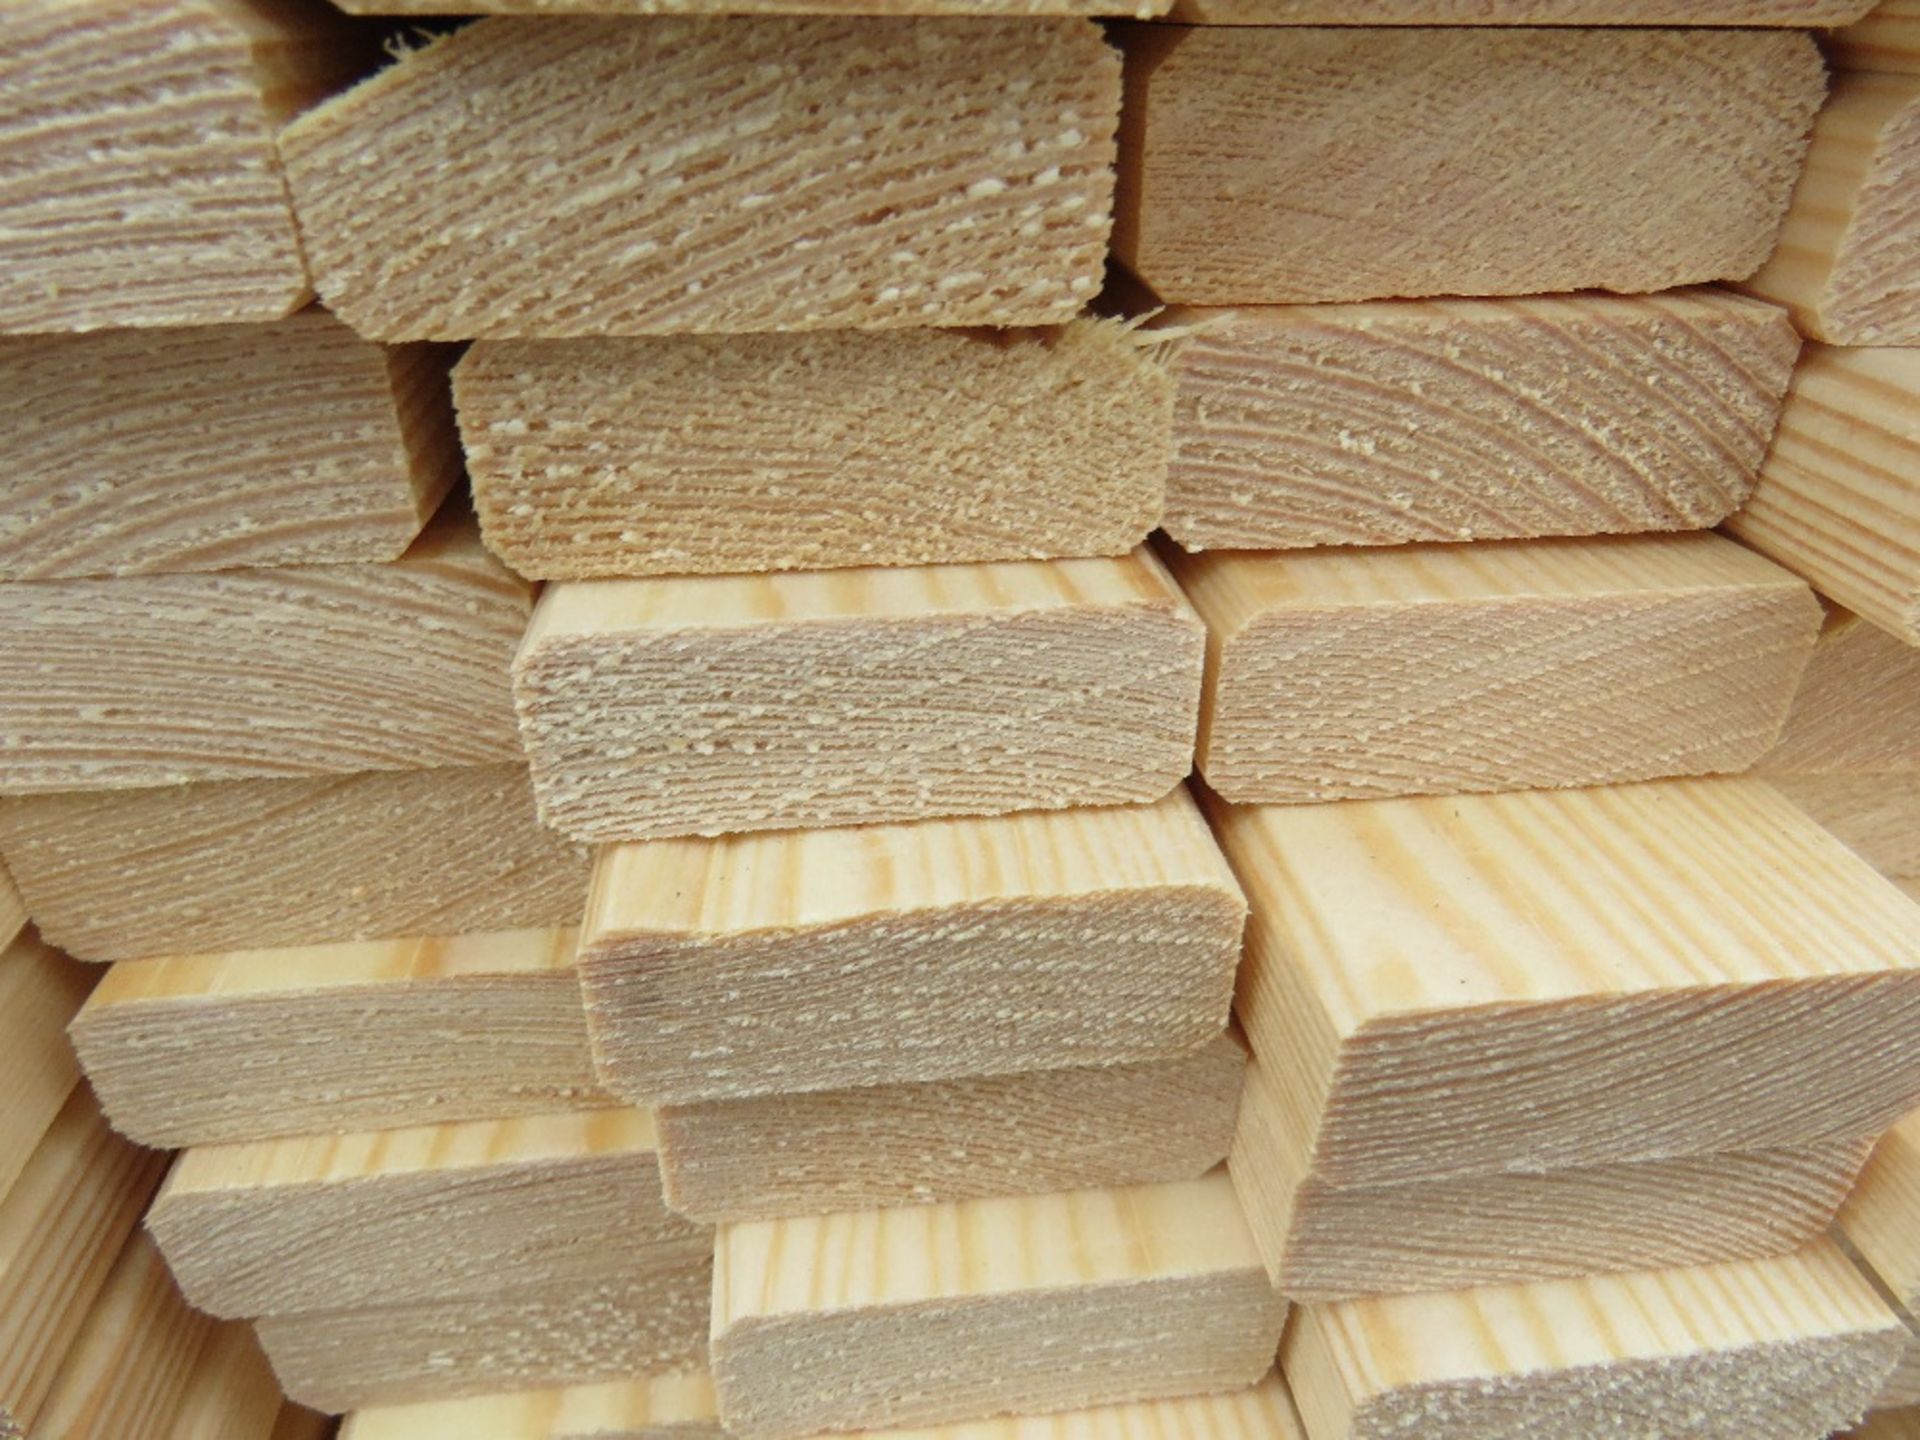 EXTRA LARGE PACK OF UNTREATED VENETIAN FENCE / TRELLIS TIMBER SLATS 1.73M LENGTH X 45MM X 17MM APPRO - Image 3 of 3